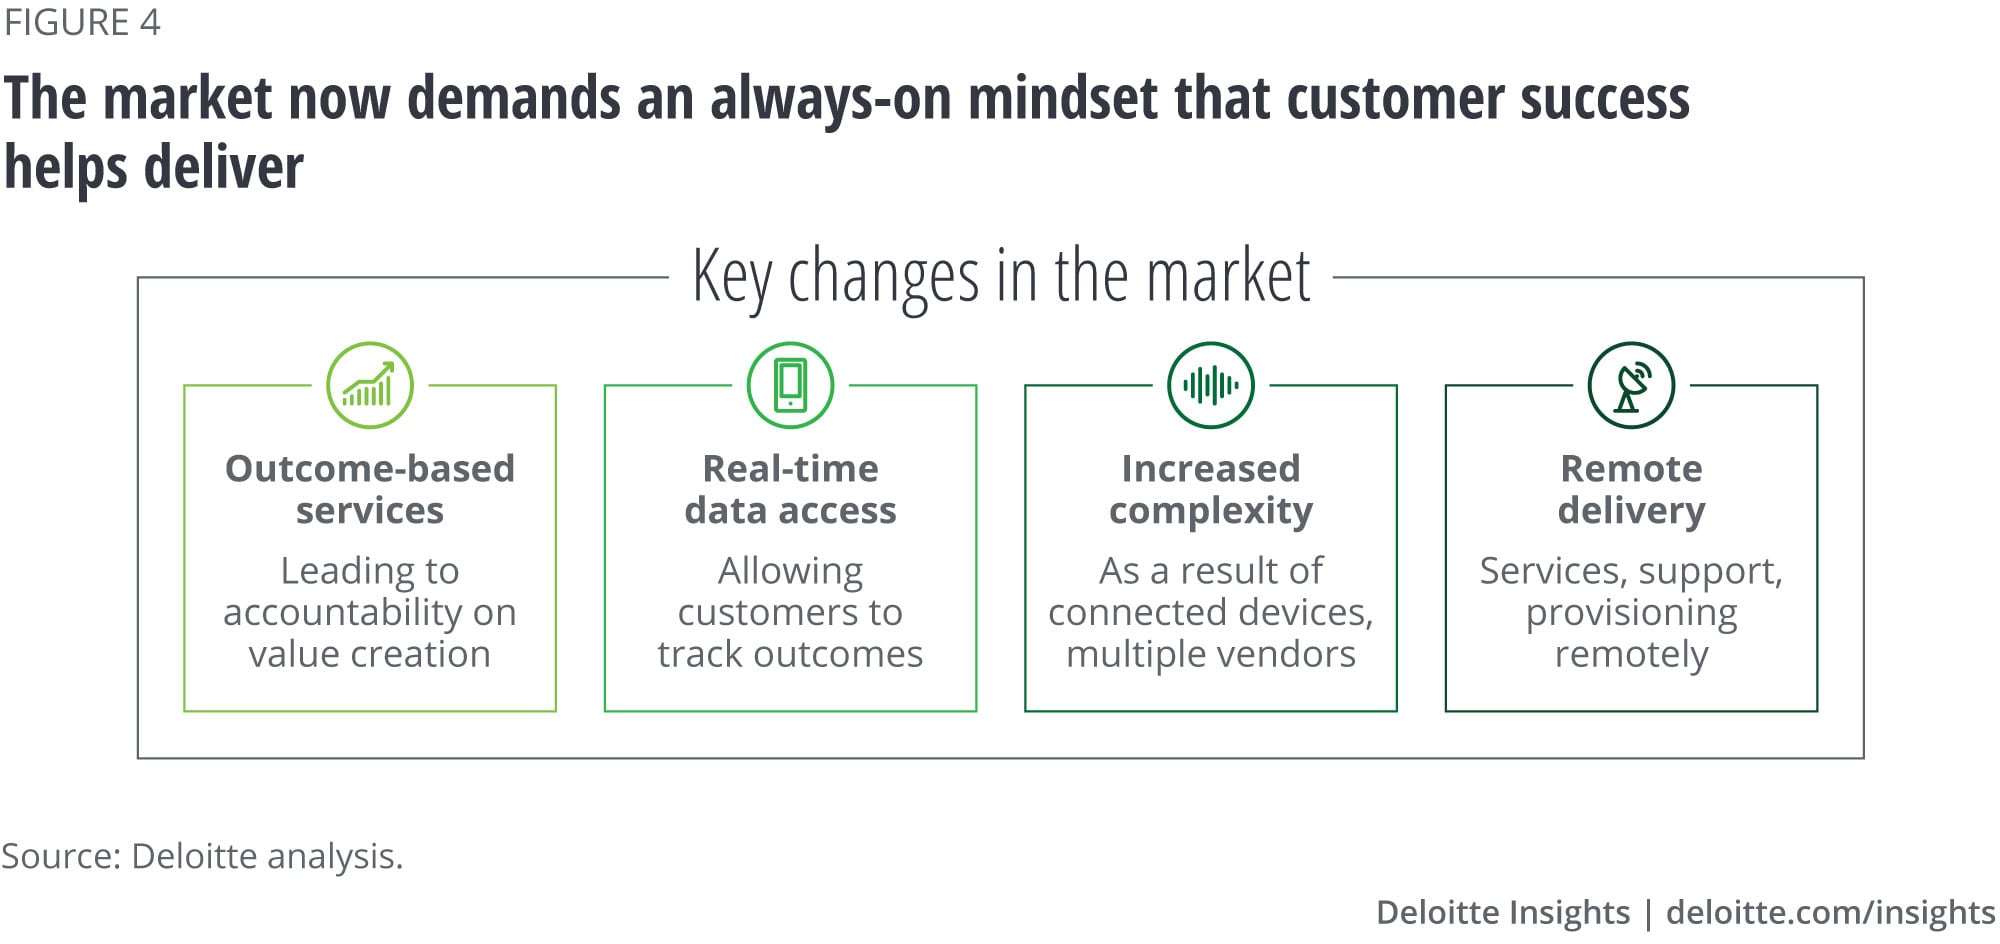 The market now demands an always-on mindset that customer success helps deliver